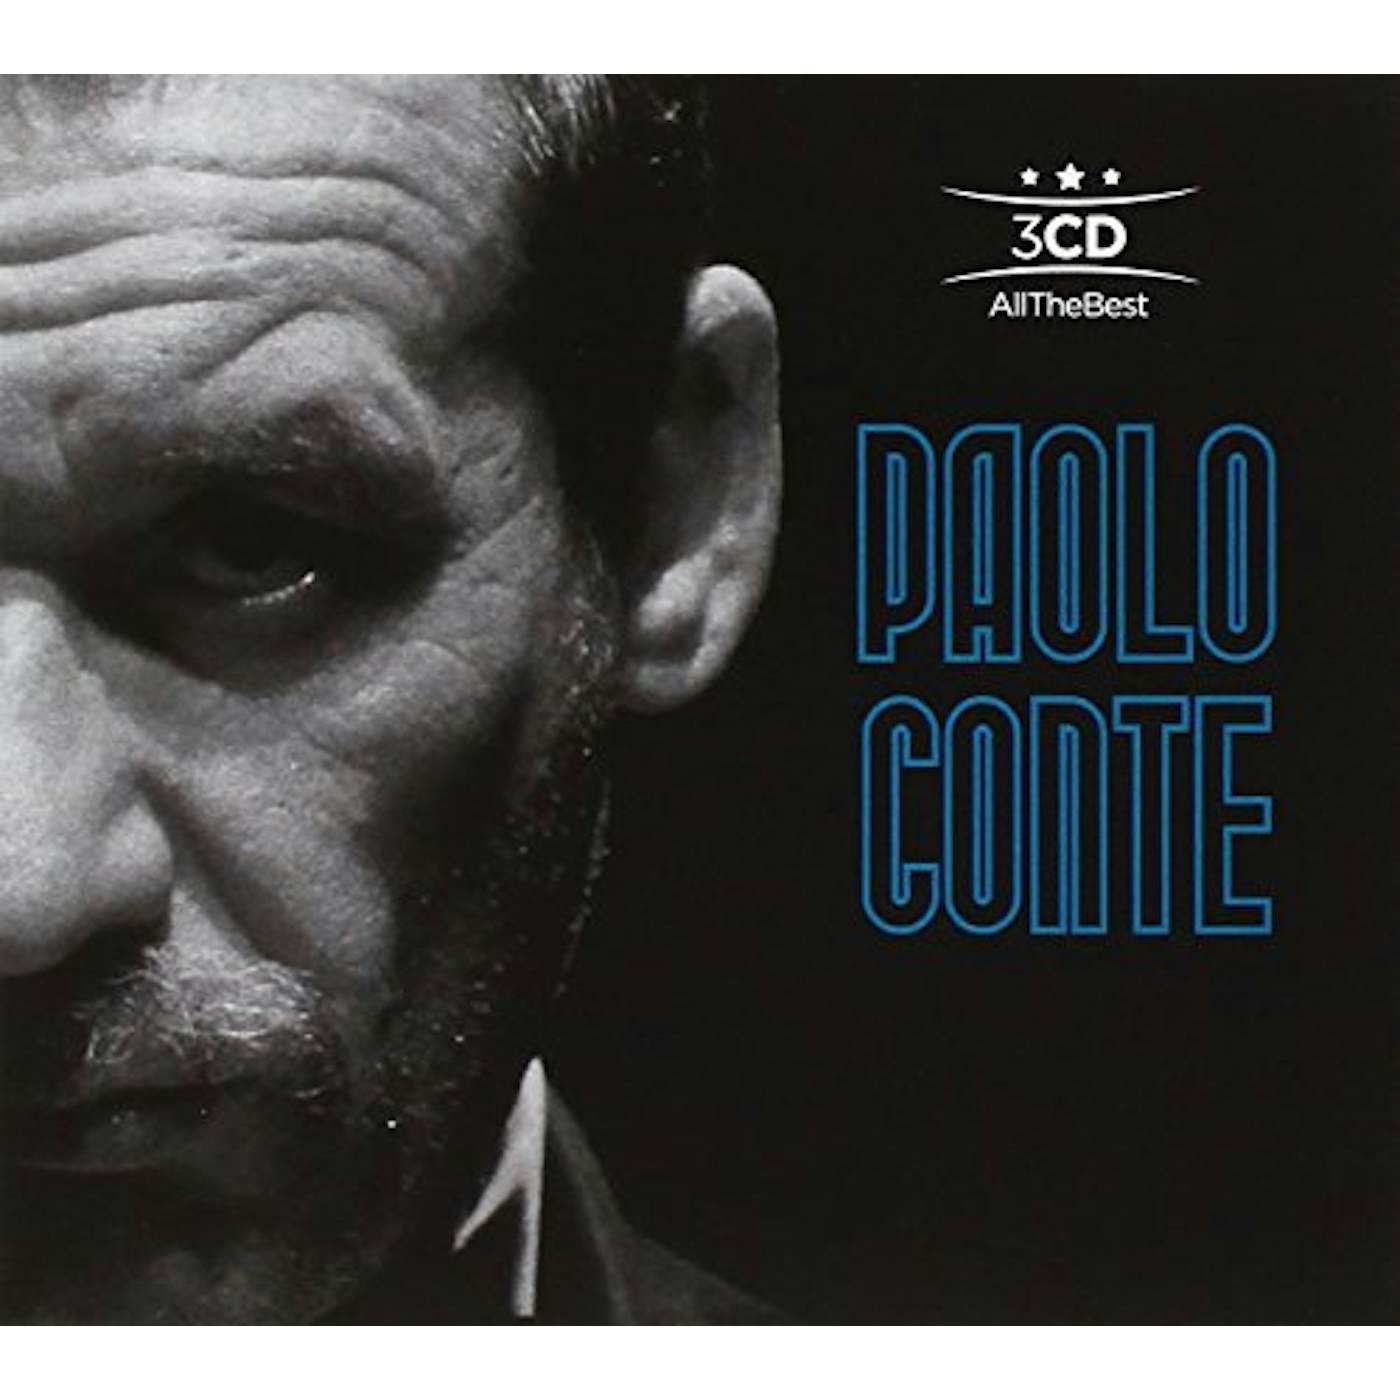 PAOLO CONTEALL THE BEST CD